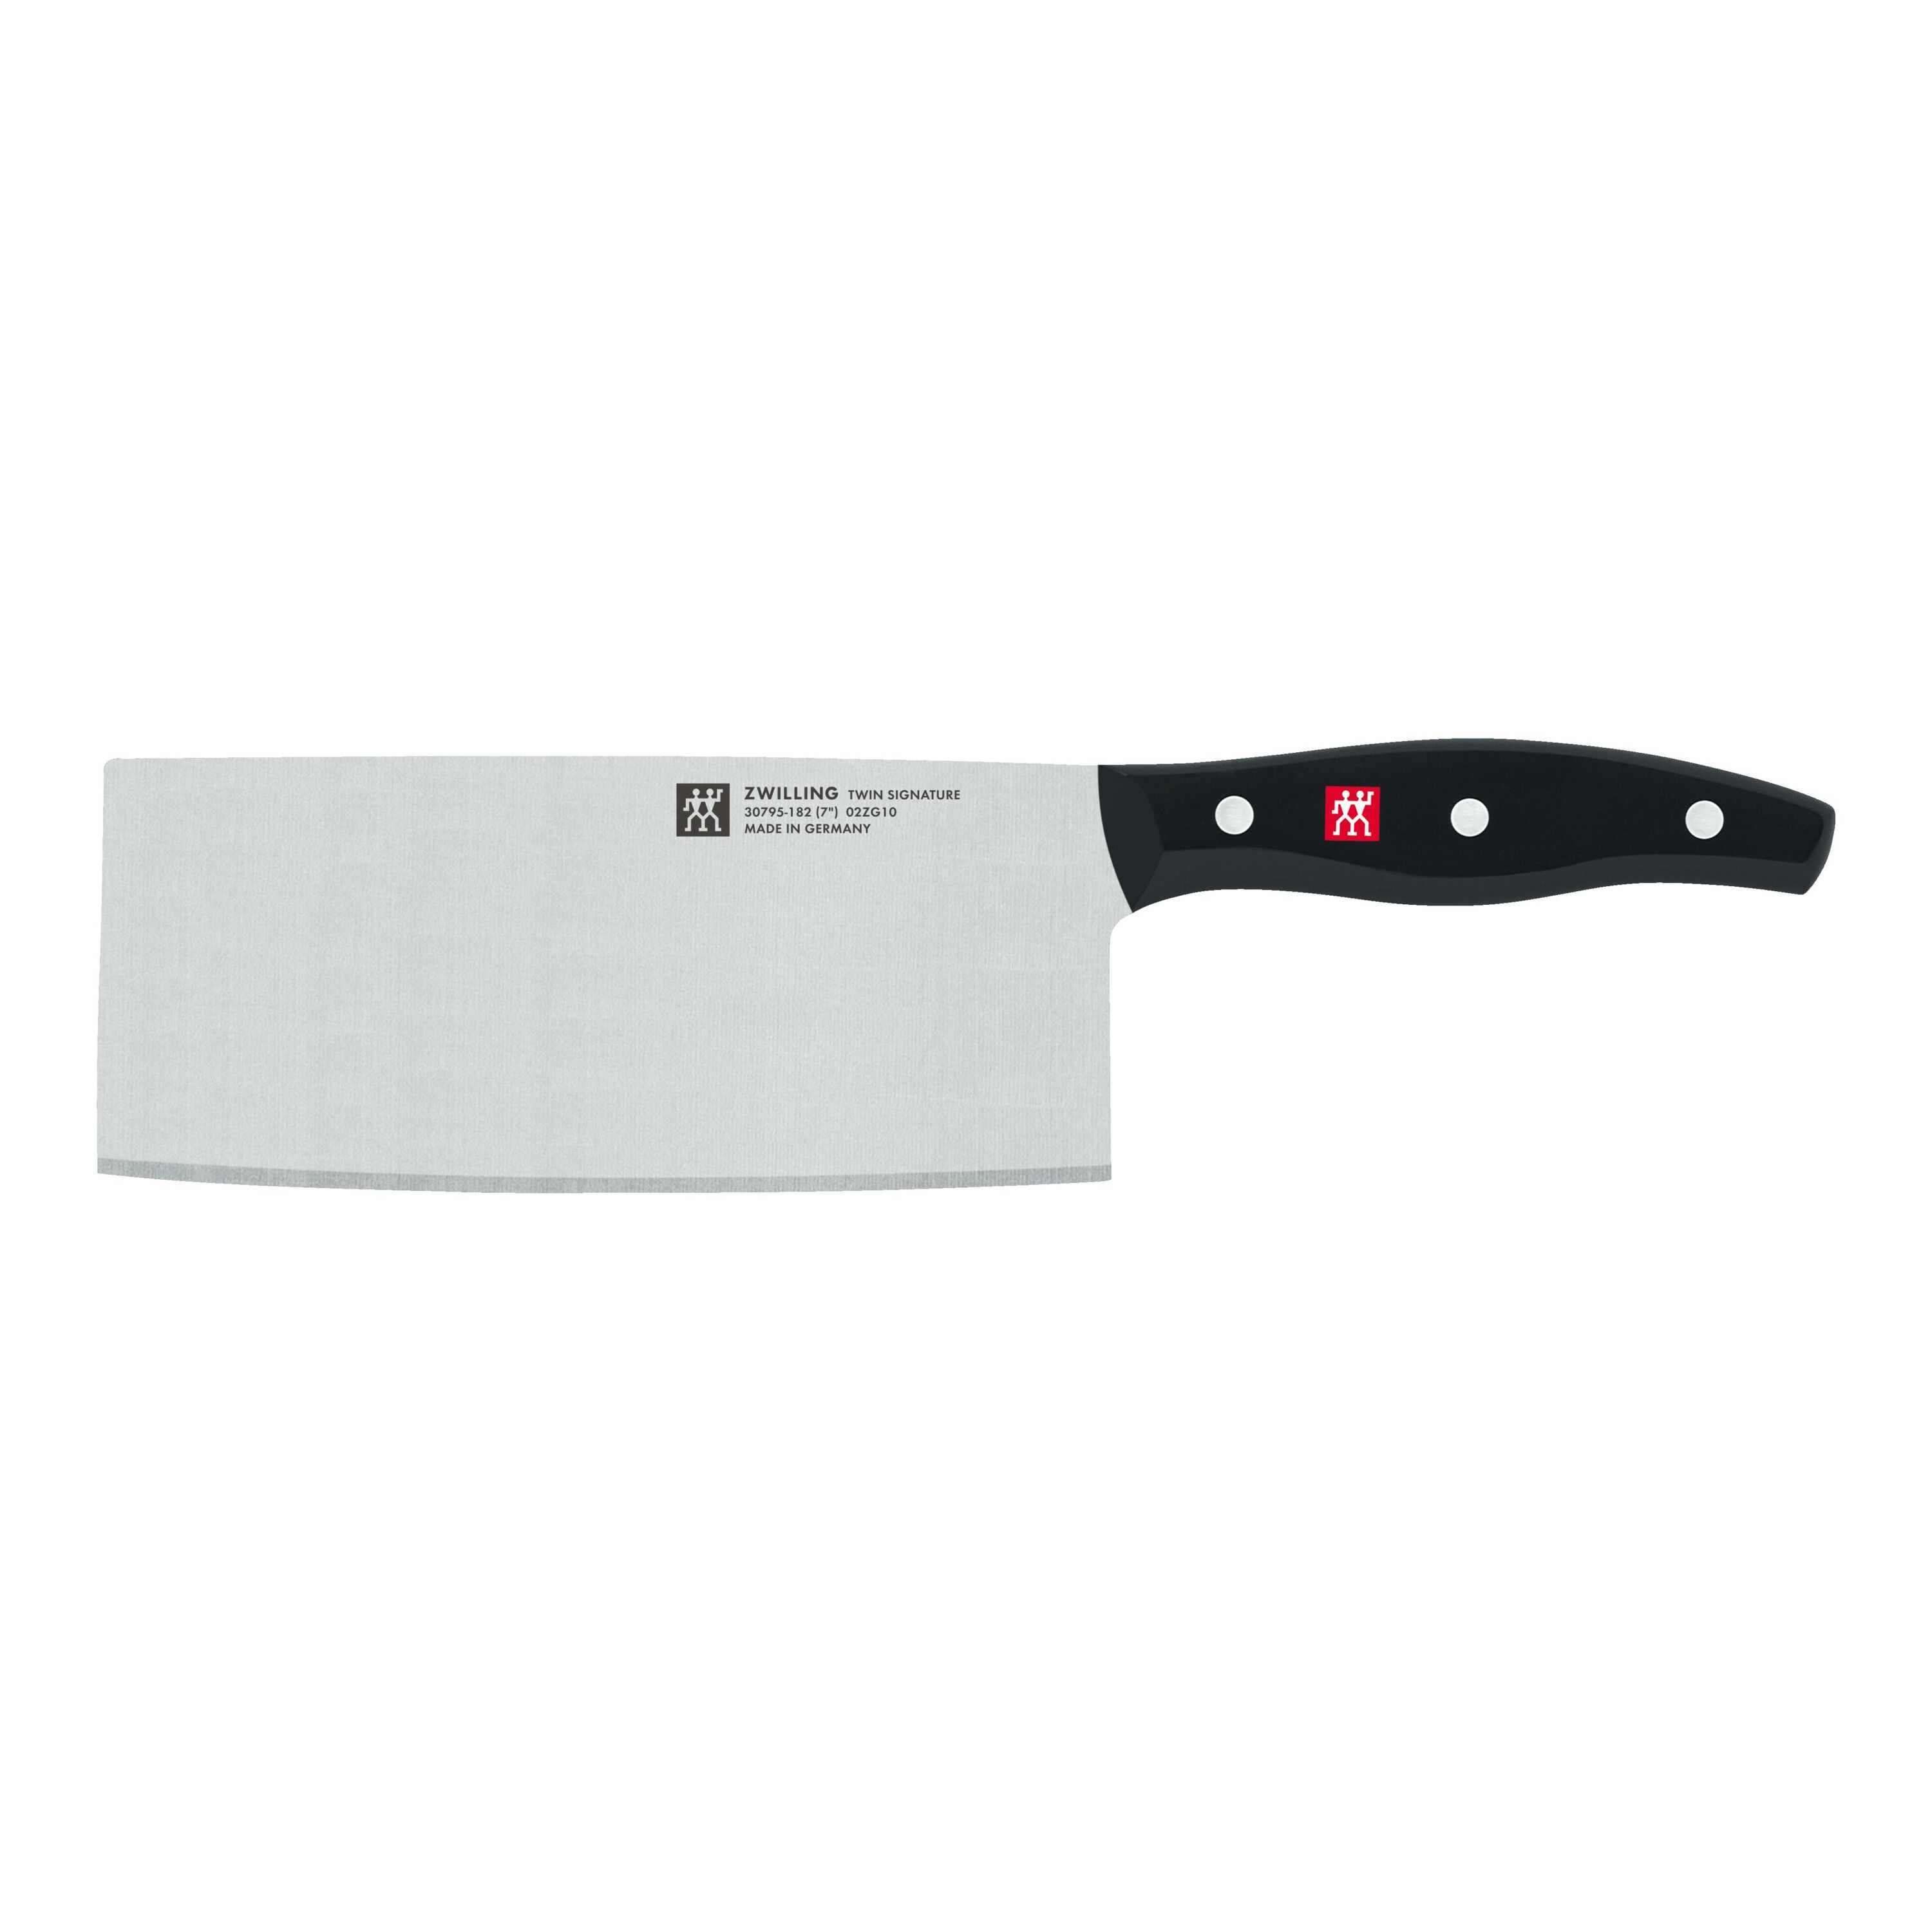 Global Classic Chop & Slice Chinese Lightweight 7 Knife/Cleaver